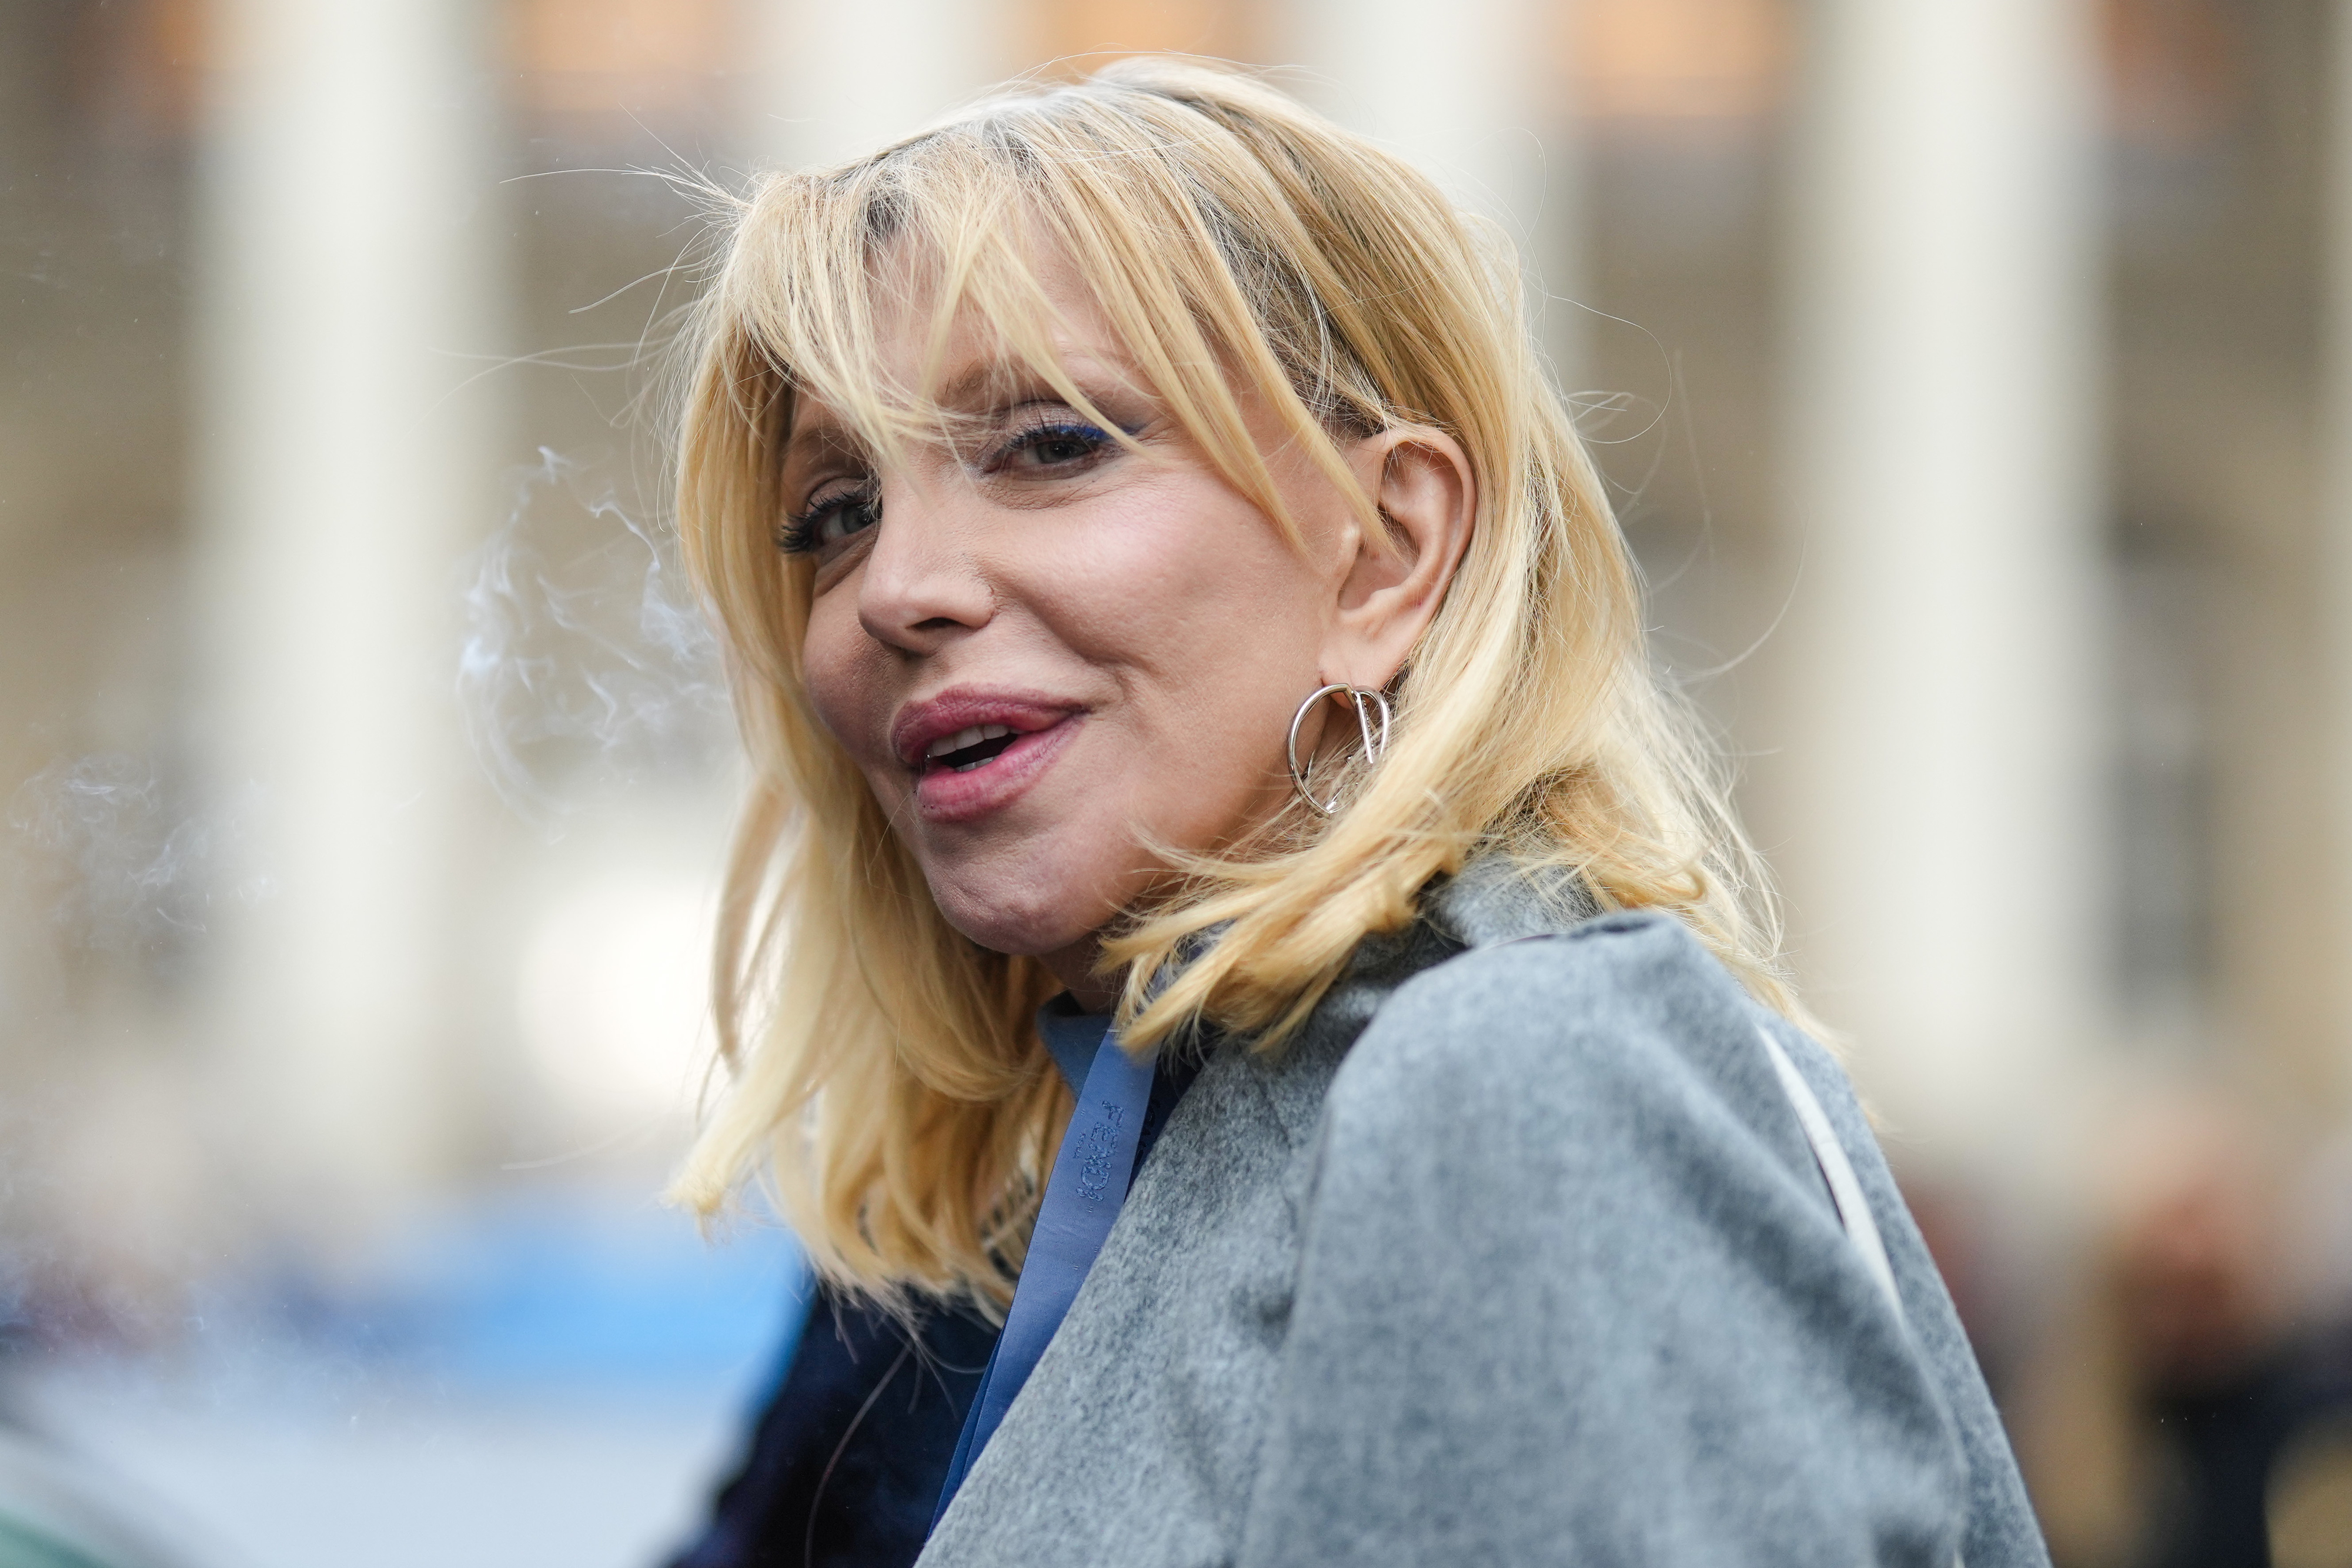 Courtney Love smiling outdoors while hoop earrings and a jacket